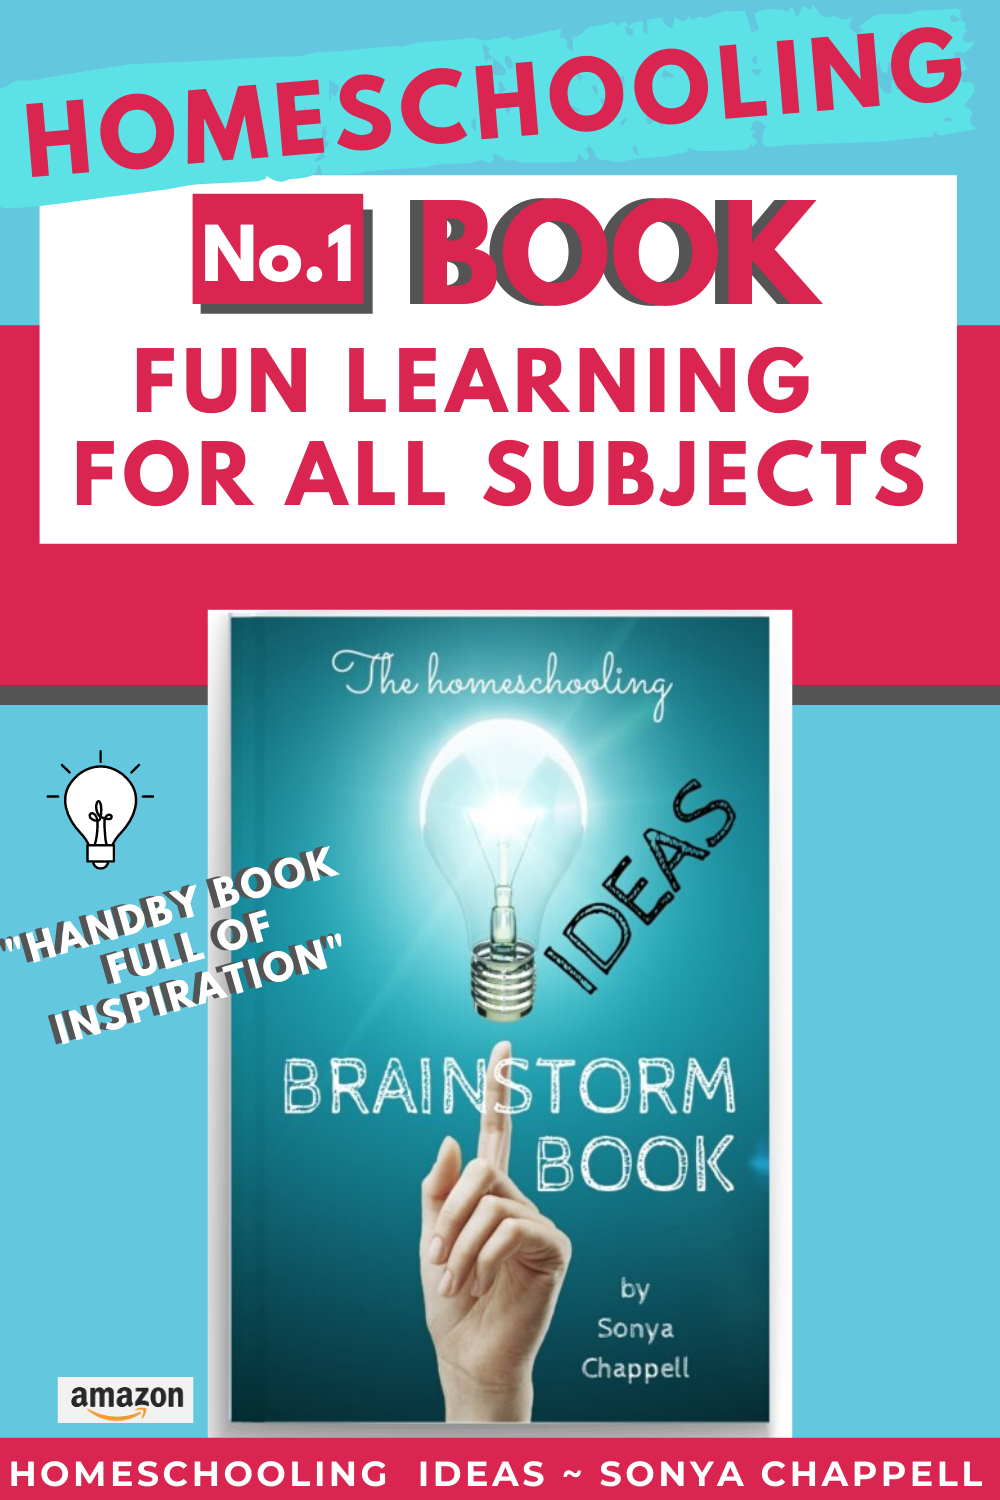 Homeschooling ideas for all subjects with fun learning activities